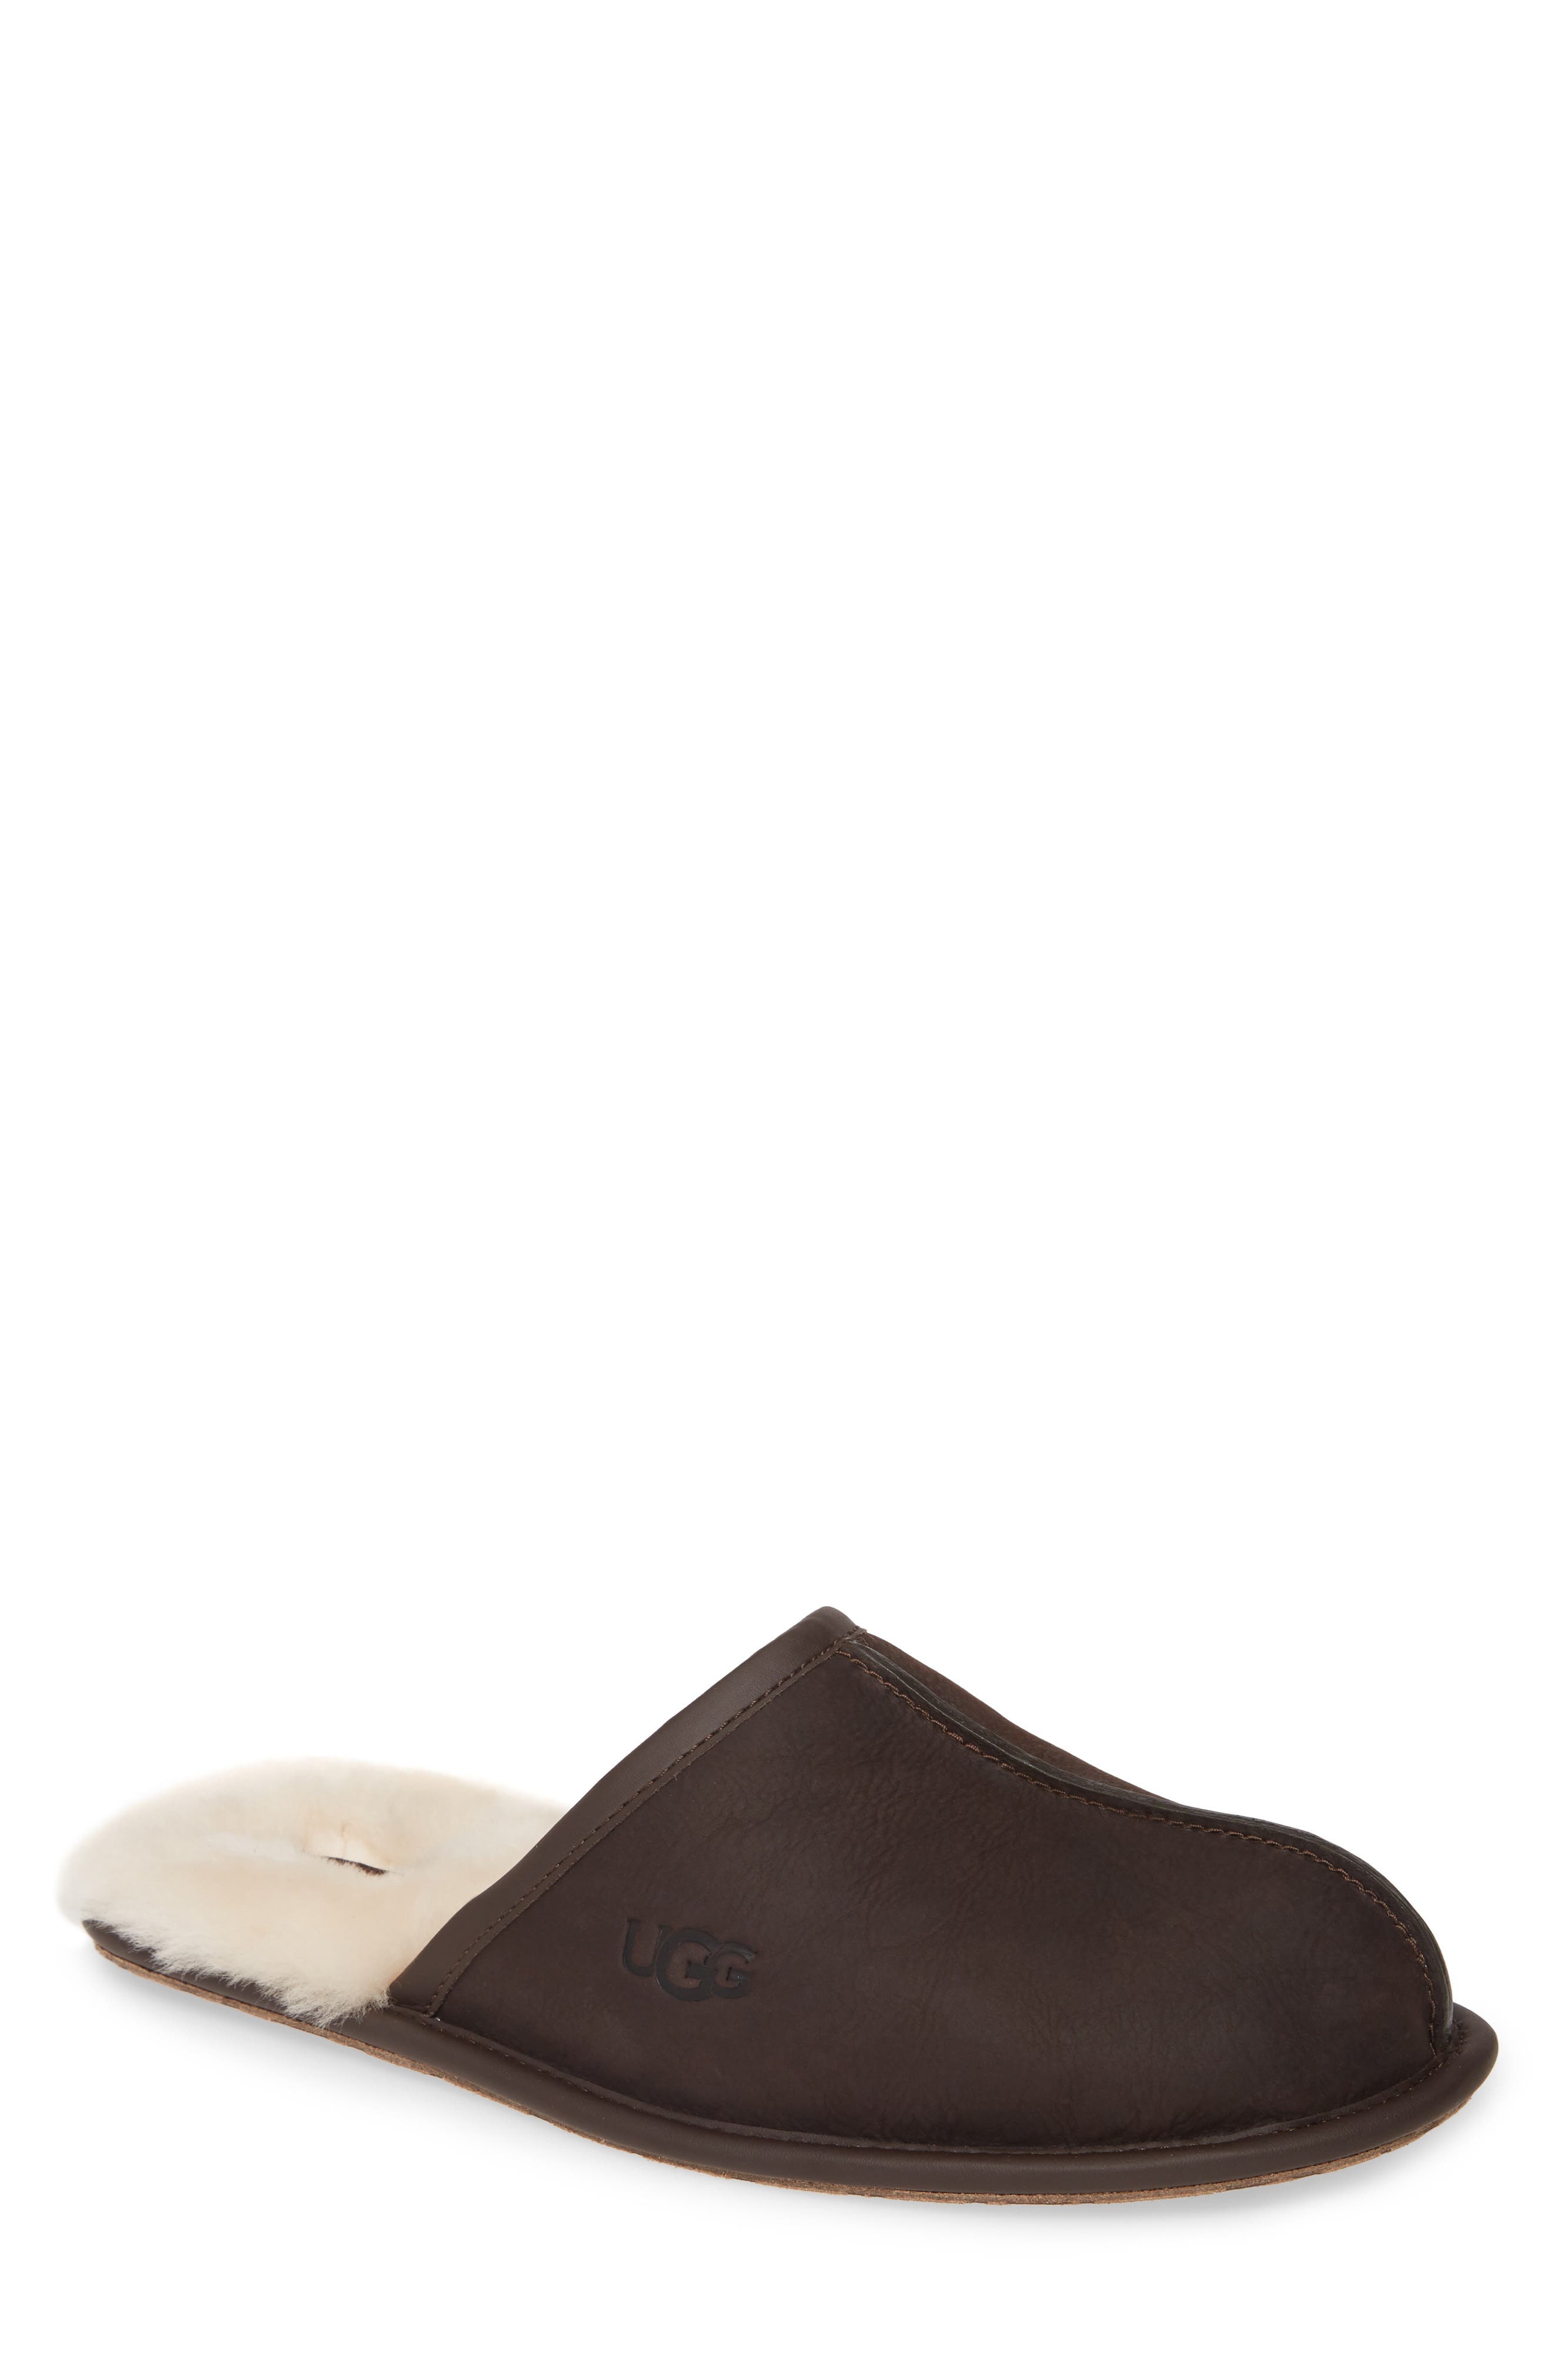 best price on mens ugg slippers